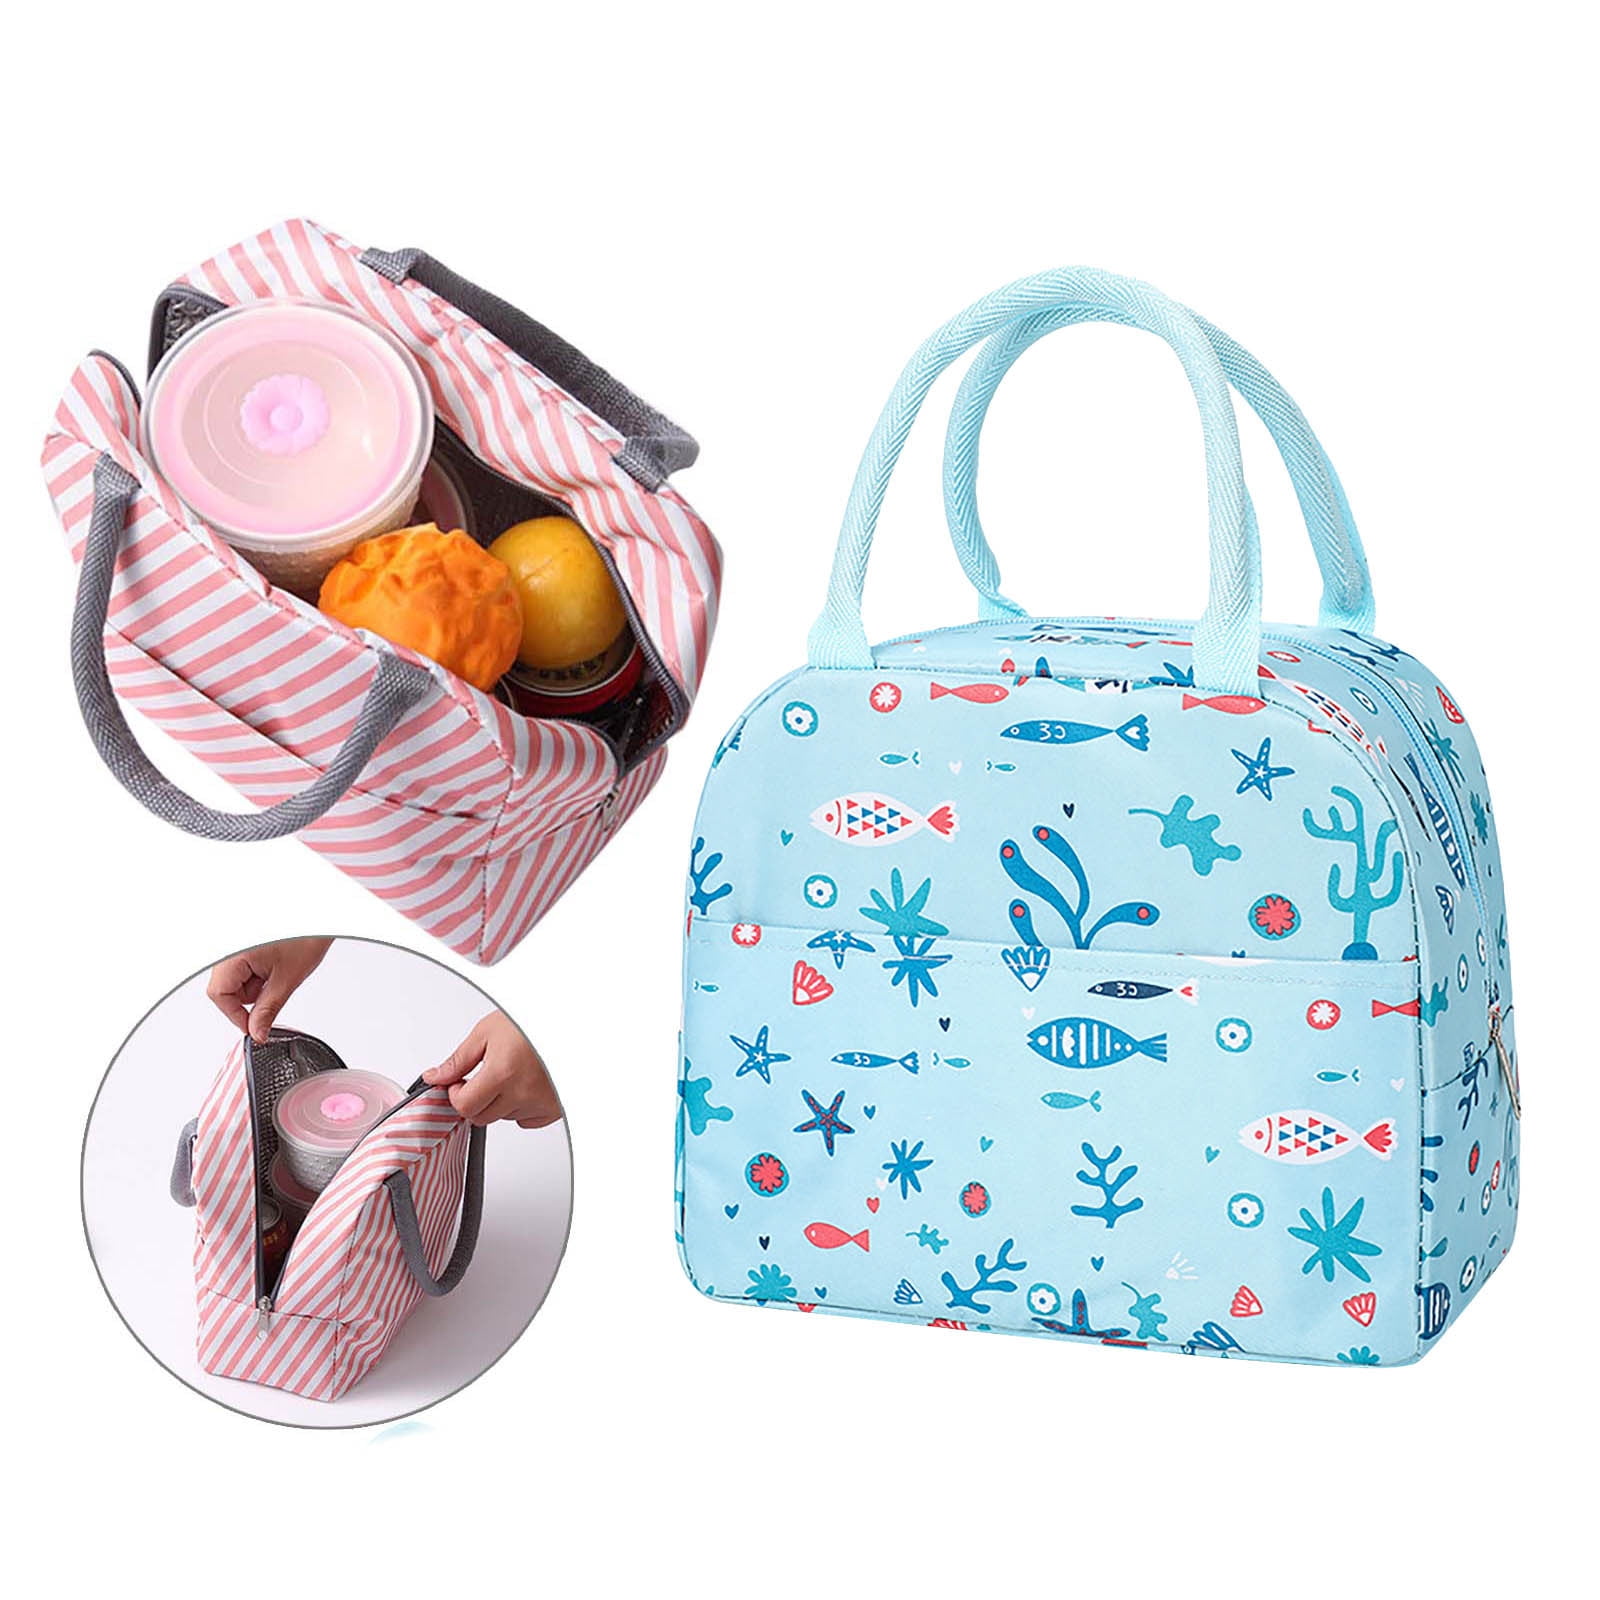 Insulated Lunch Bag For Women Compact Reusable Tote Cooler Bag Lunch ...